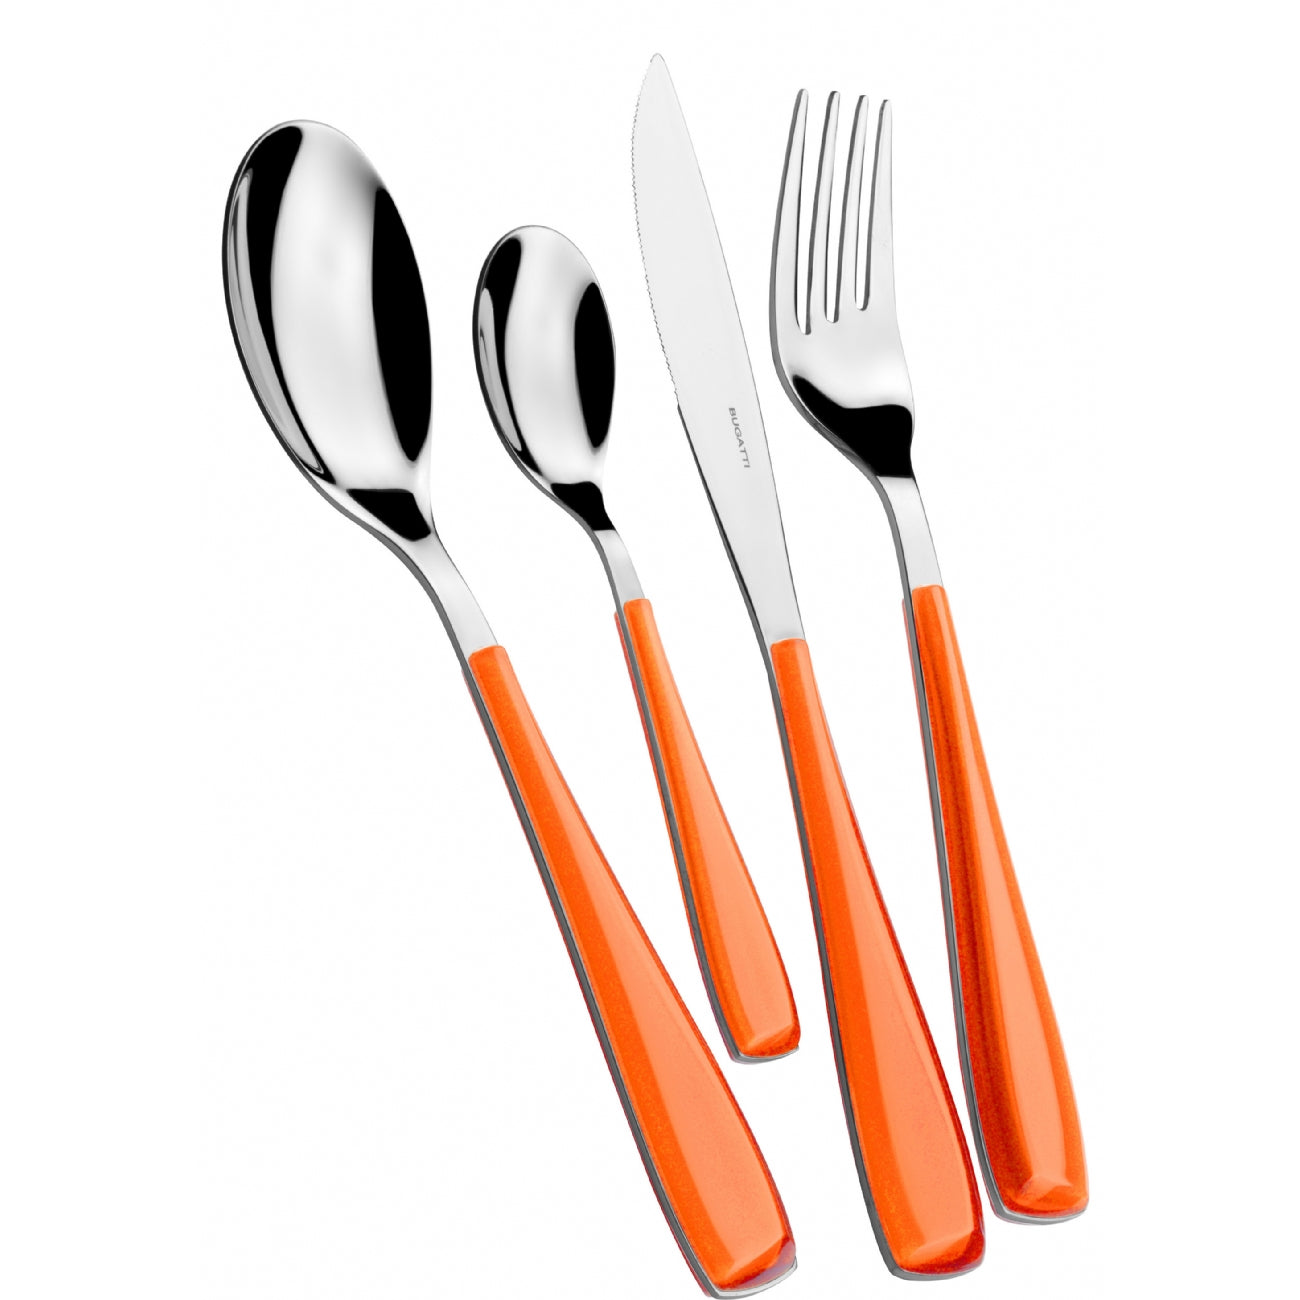 BUGATTI, Essenza, 24 Piece Cutlery Set in 18/10 Stainless Steel and Orange Color Handle. Cutlery Set for 6 People Consisting of 6 Spoons, 6 Forks, 6 Knives and 6 Coffee Spoons